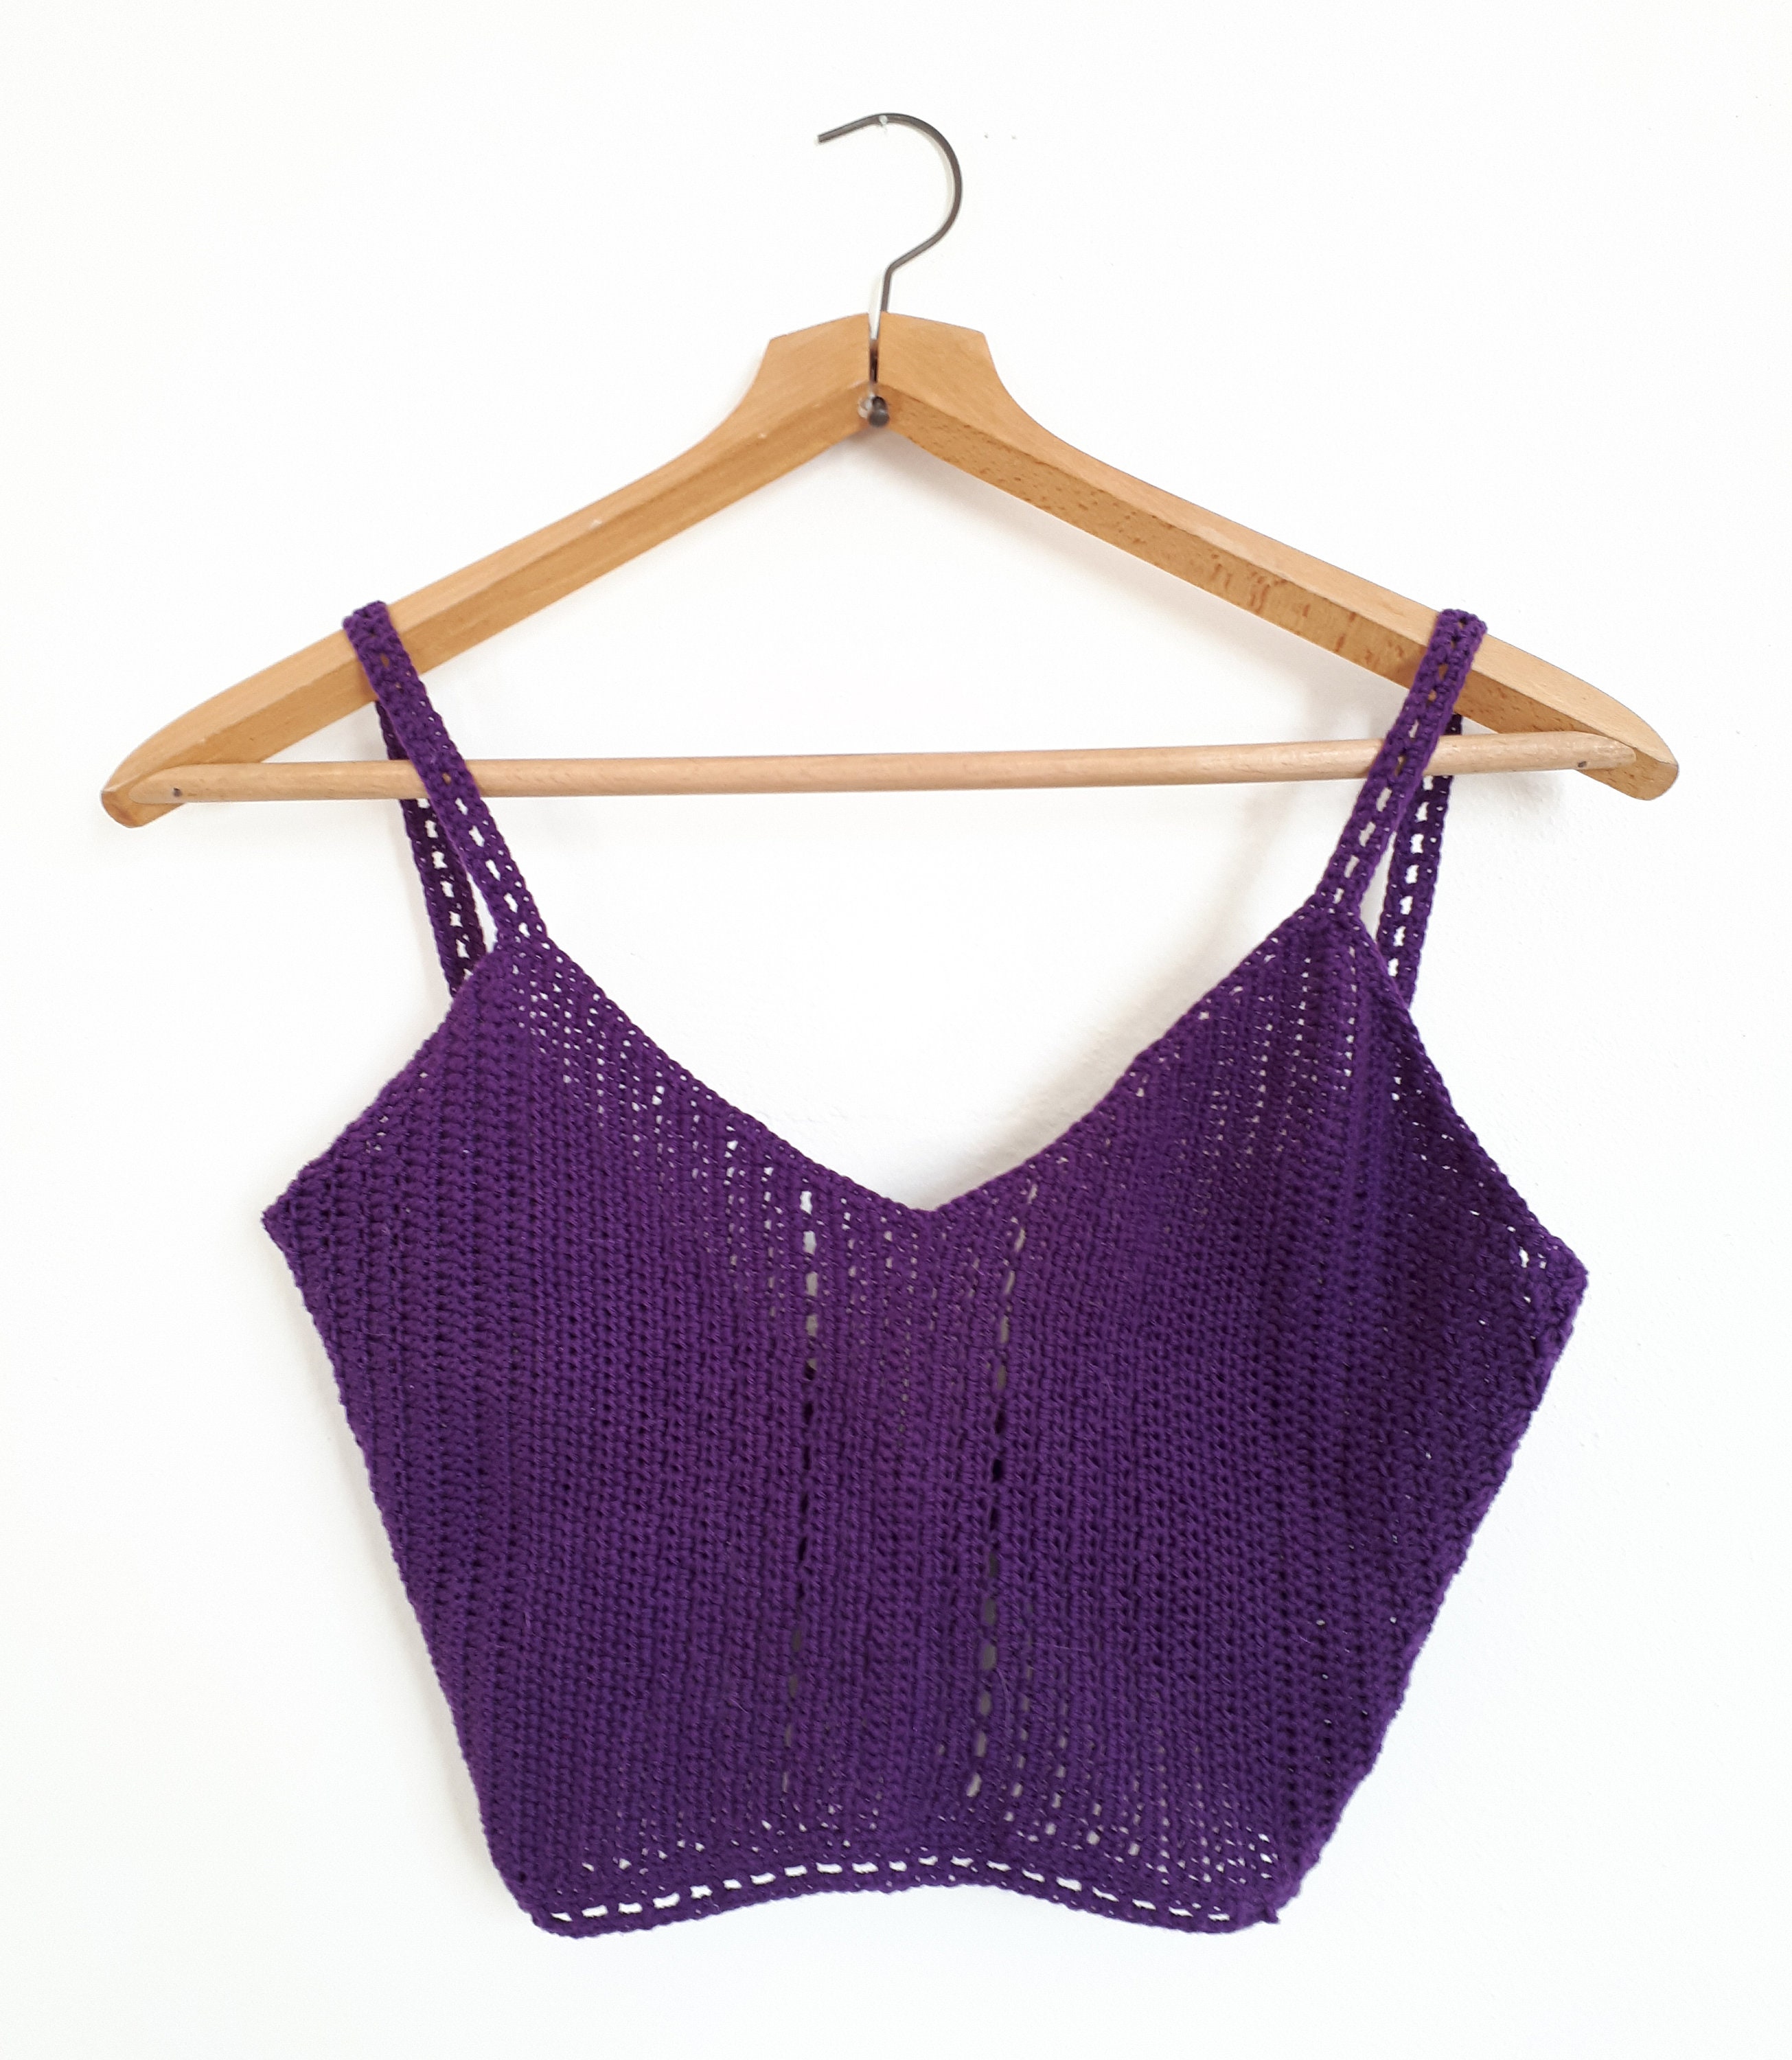 Purple magic top / crochet top pattern with open back / lace | Etsy